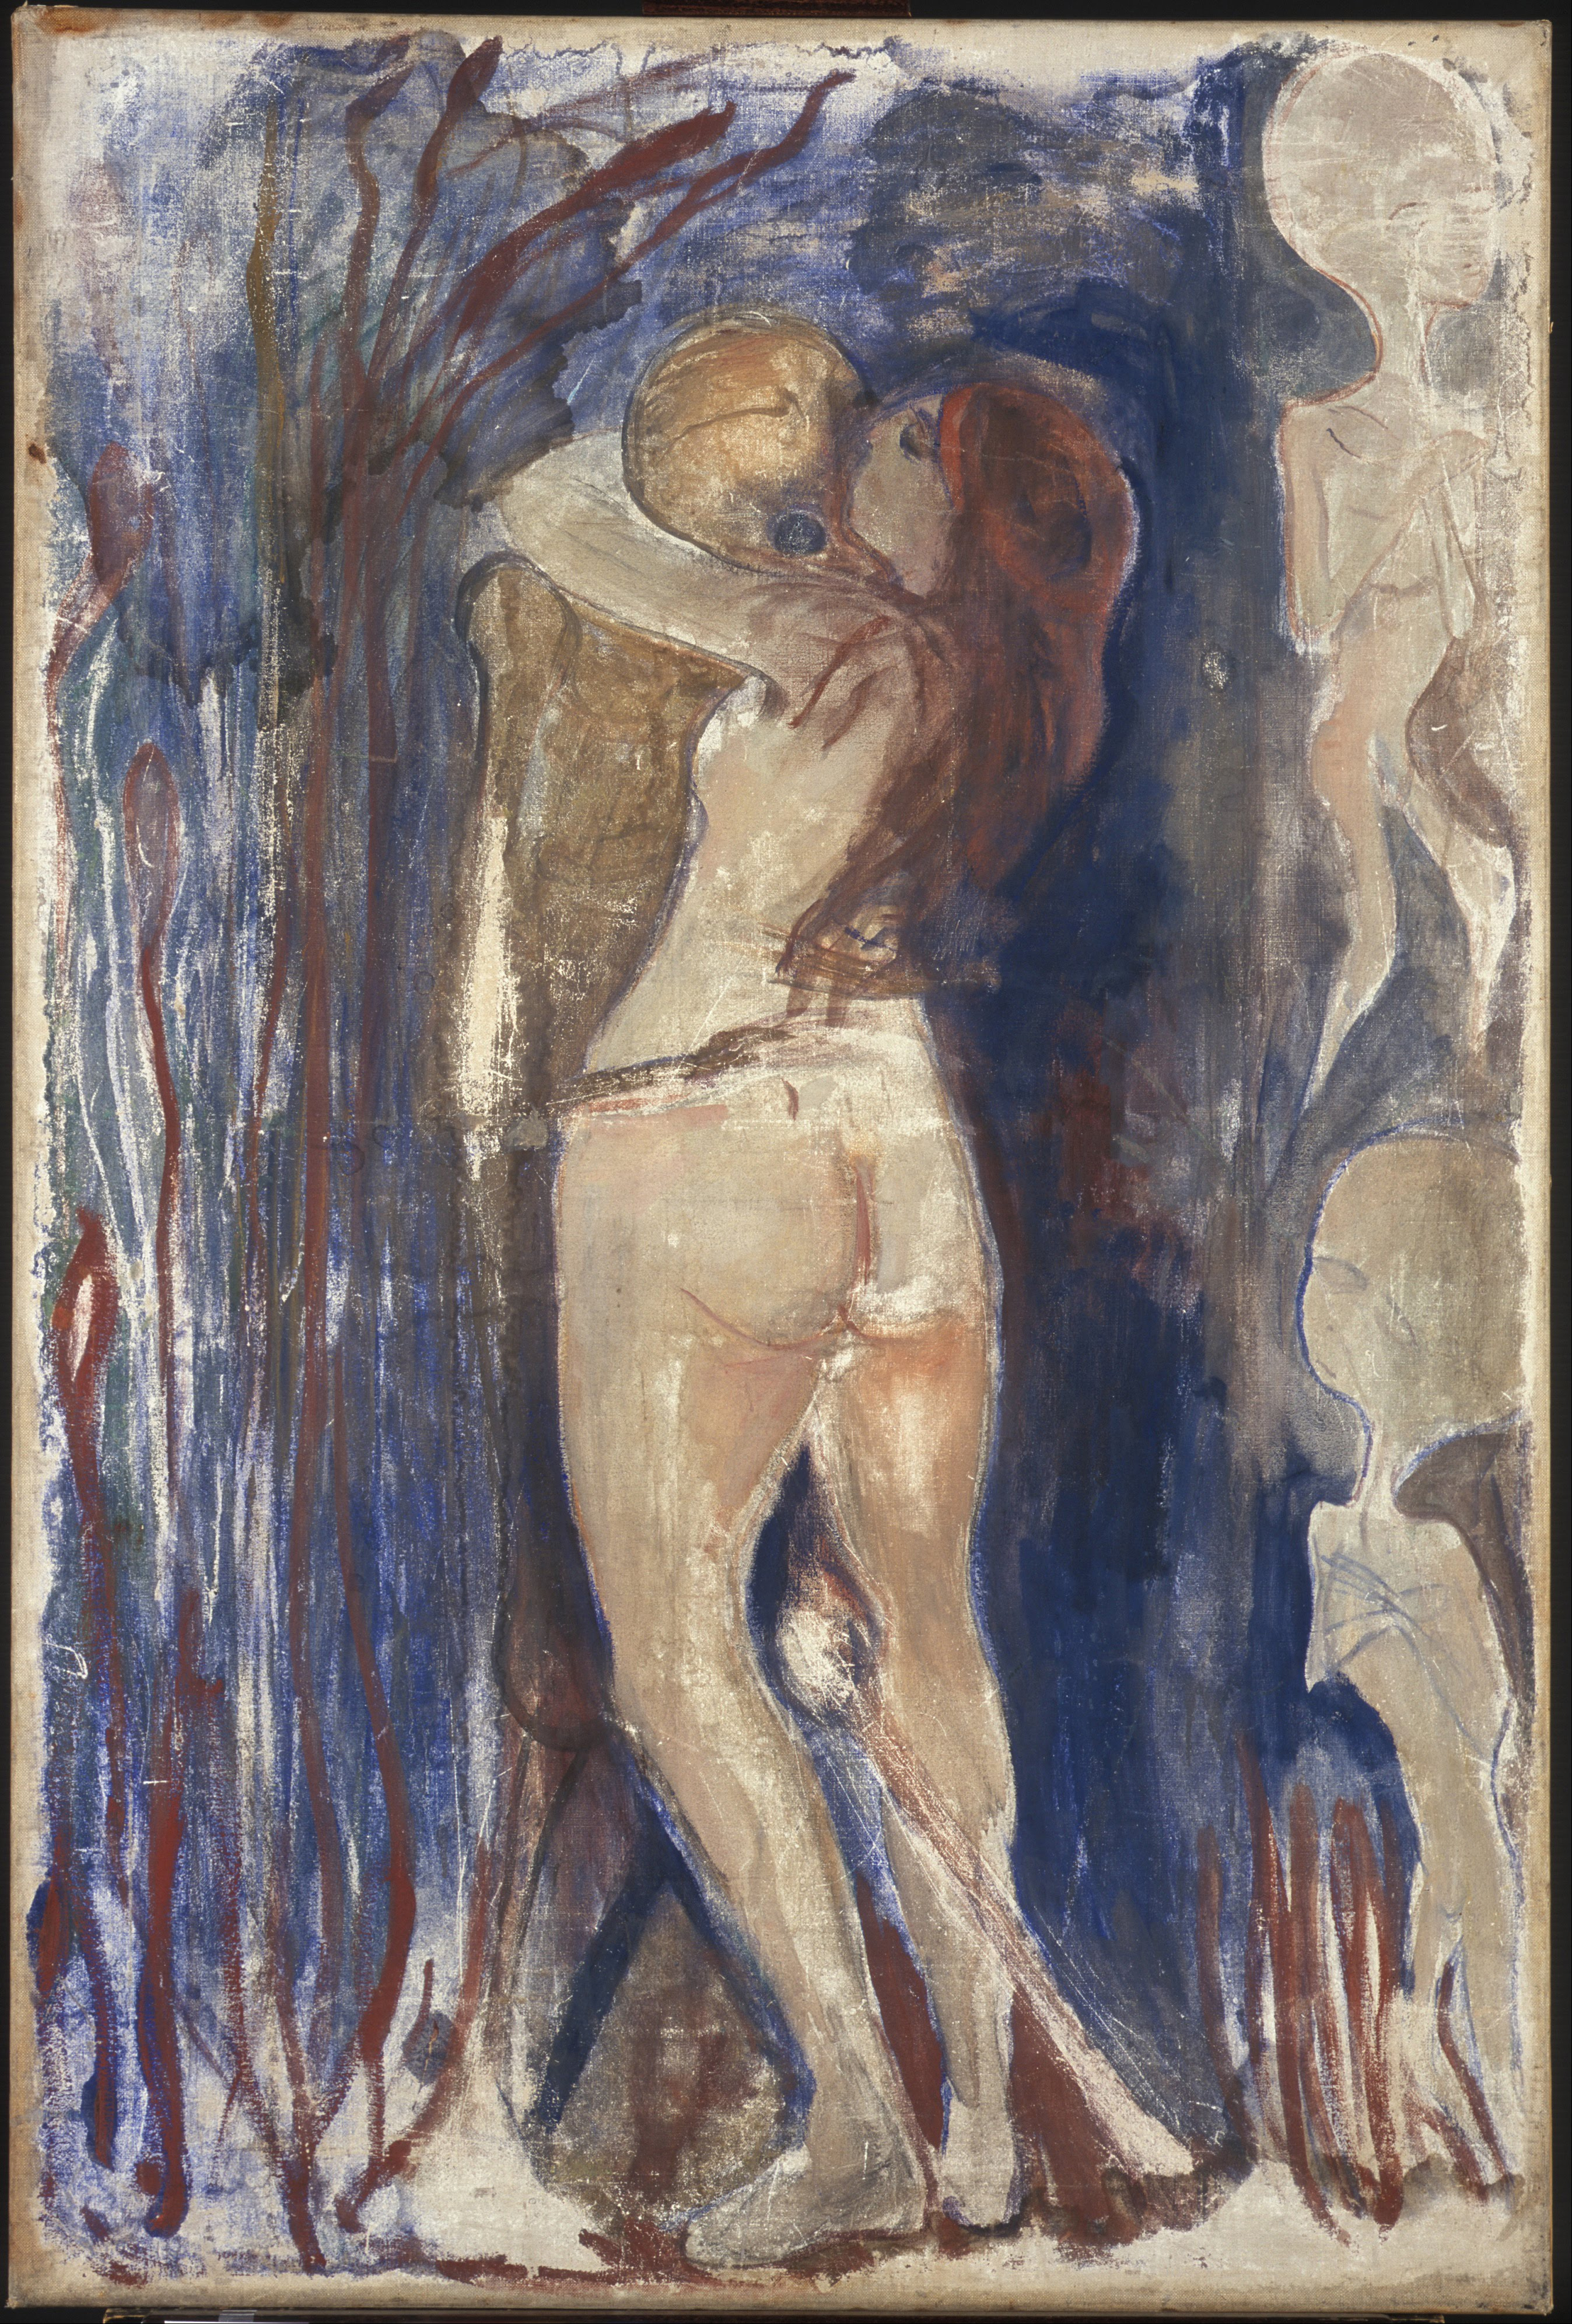 Death and Life by Edvard Munch - 1894 - 86 x 128 cm Munch Museum